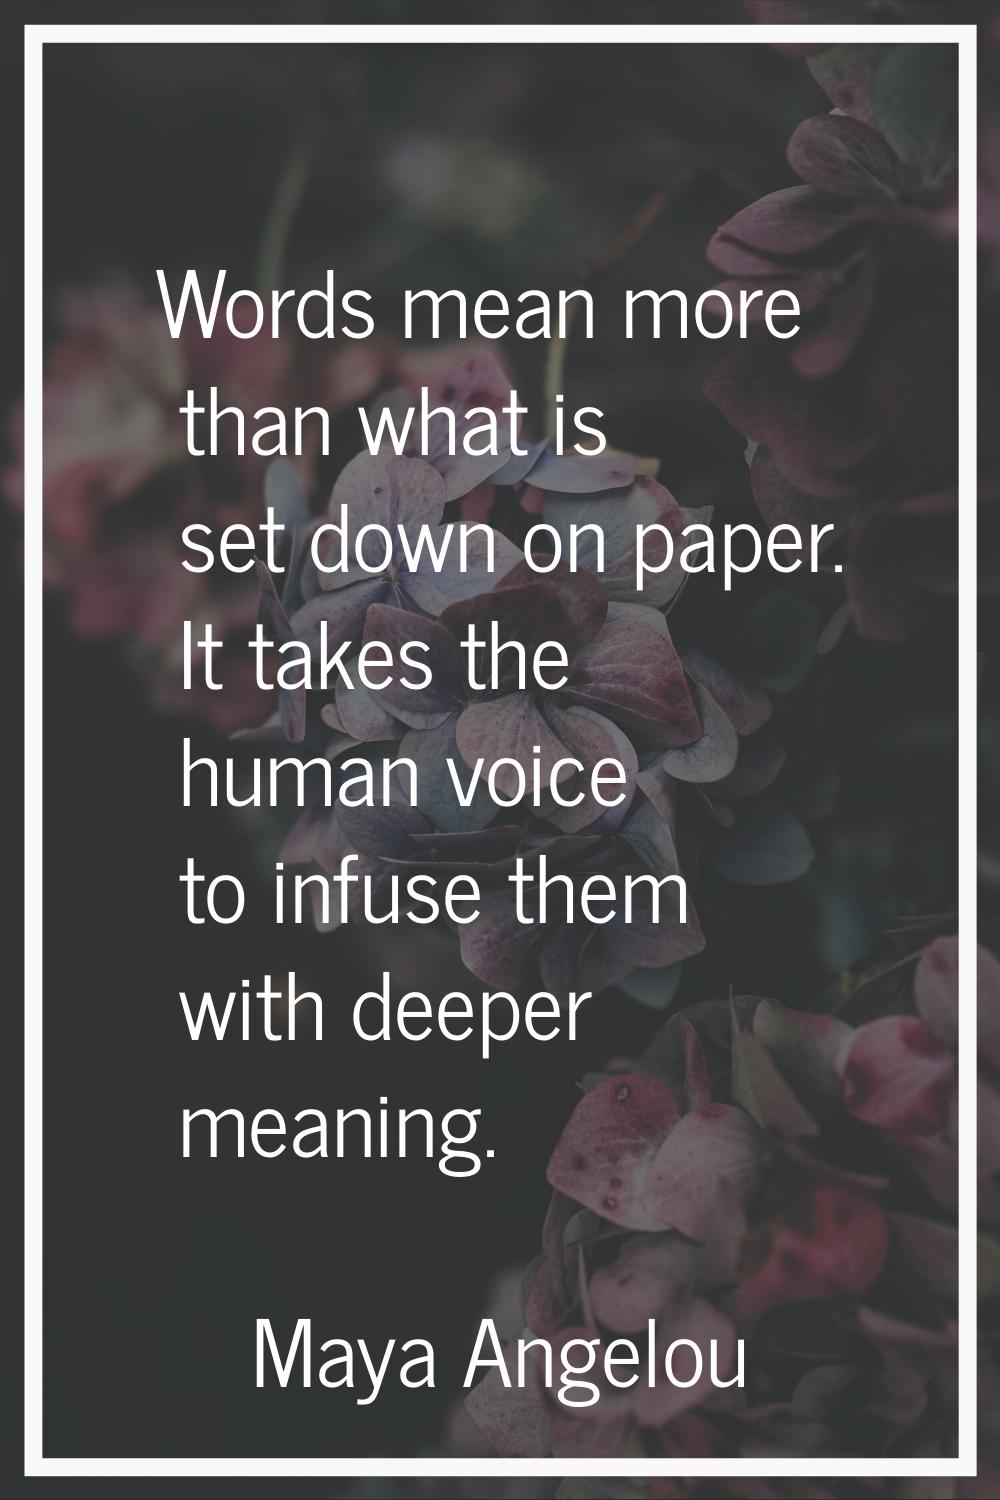 Words mean more than what is set down on paper. It takes the human voice to infuse them with deeper